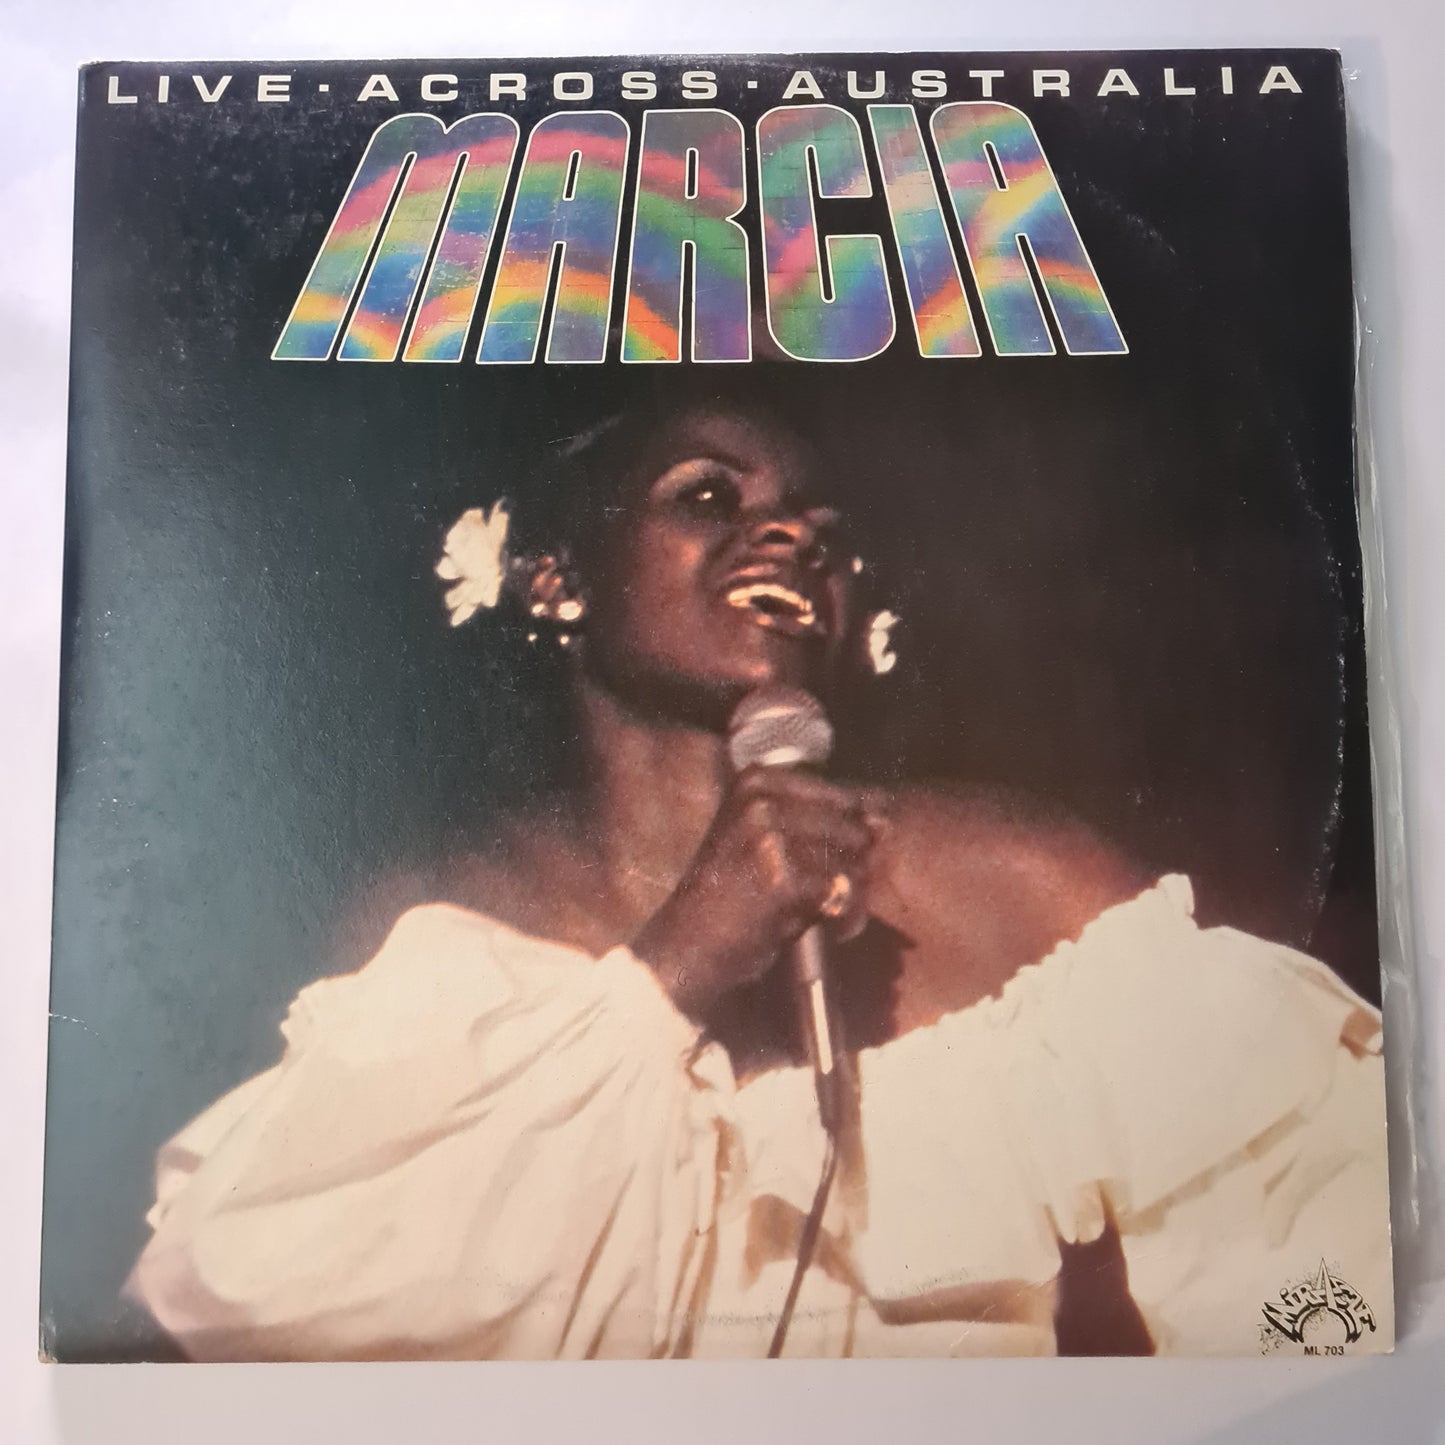 CLEARANCE STOCK! - MARCIA HINES - VINYL RECORD